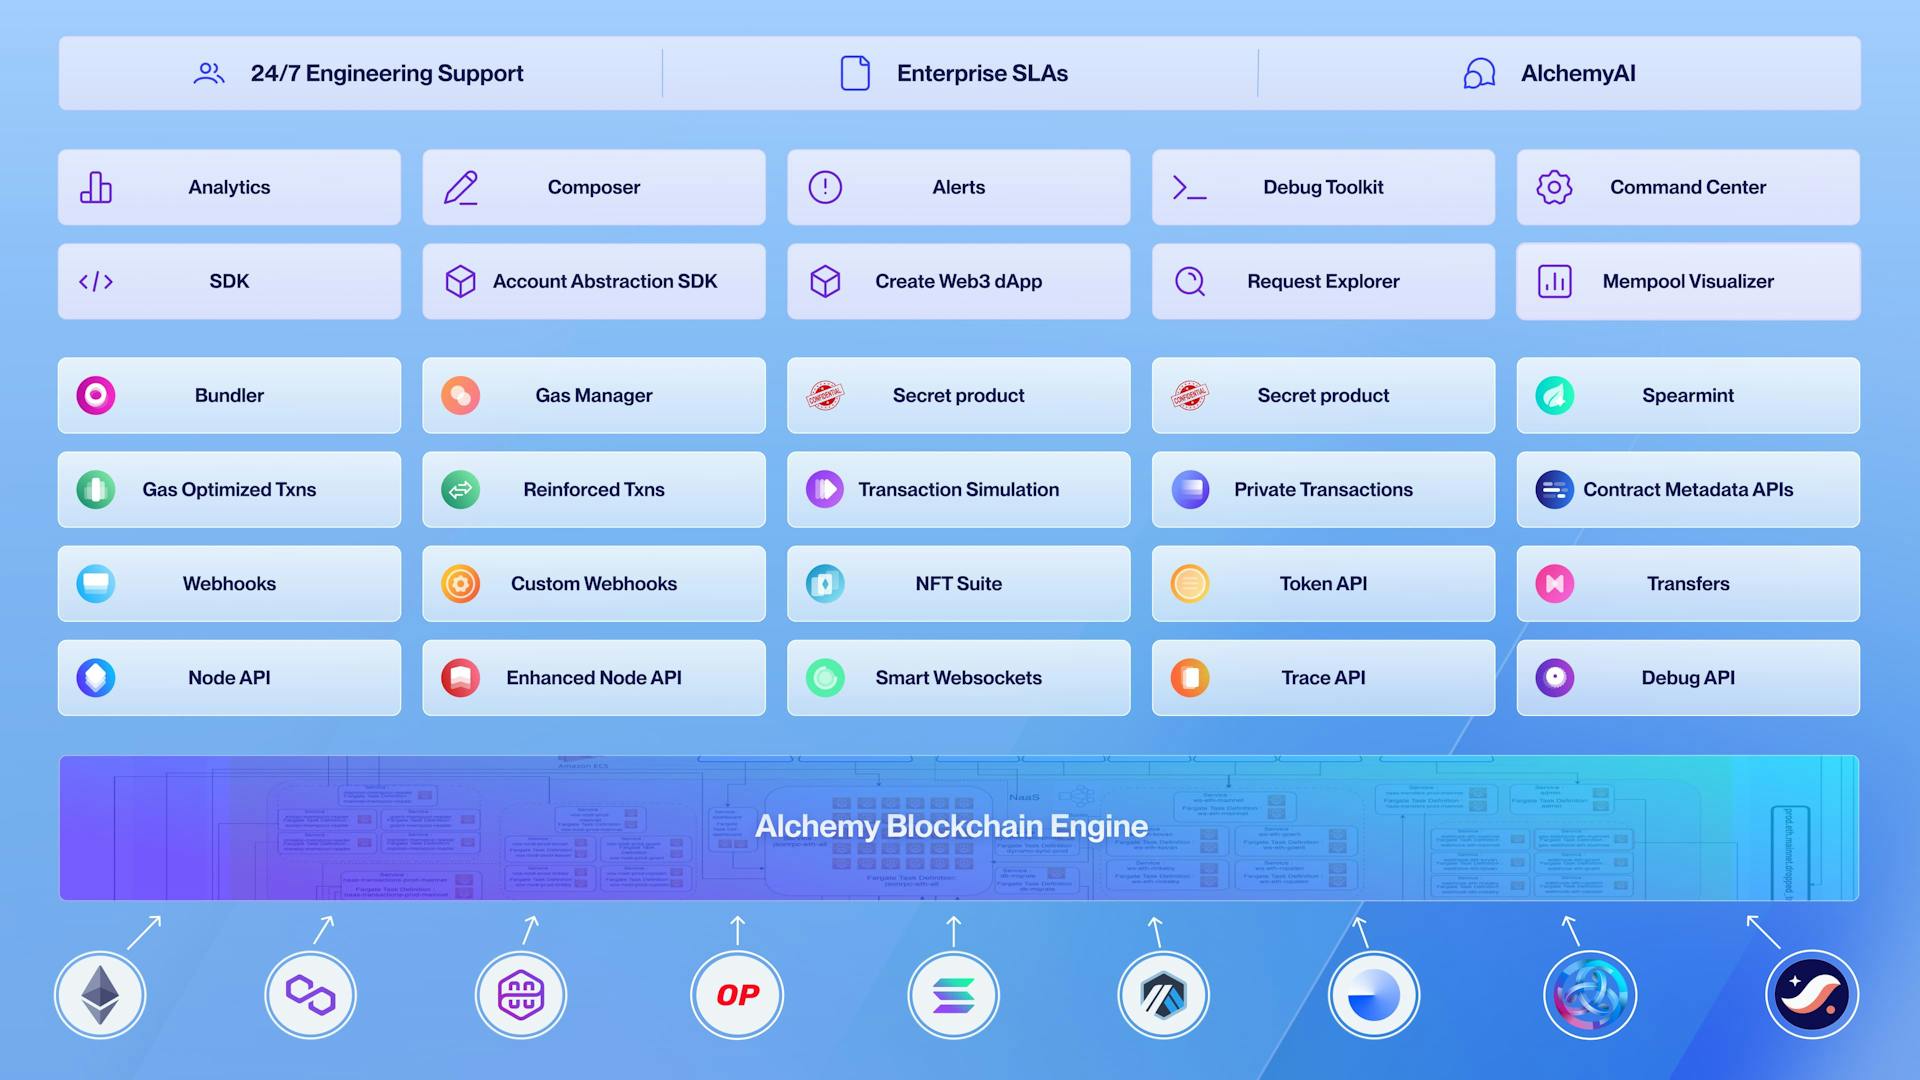 Products Included in Alchemy's Development Platform